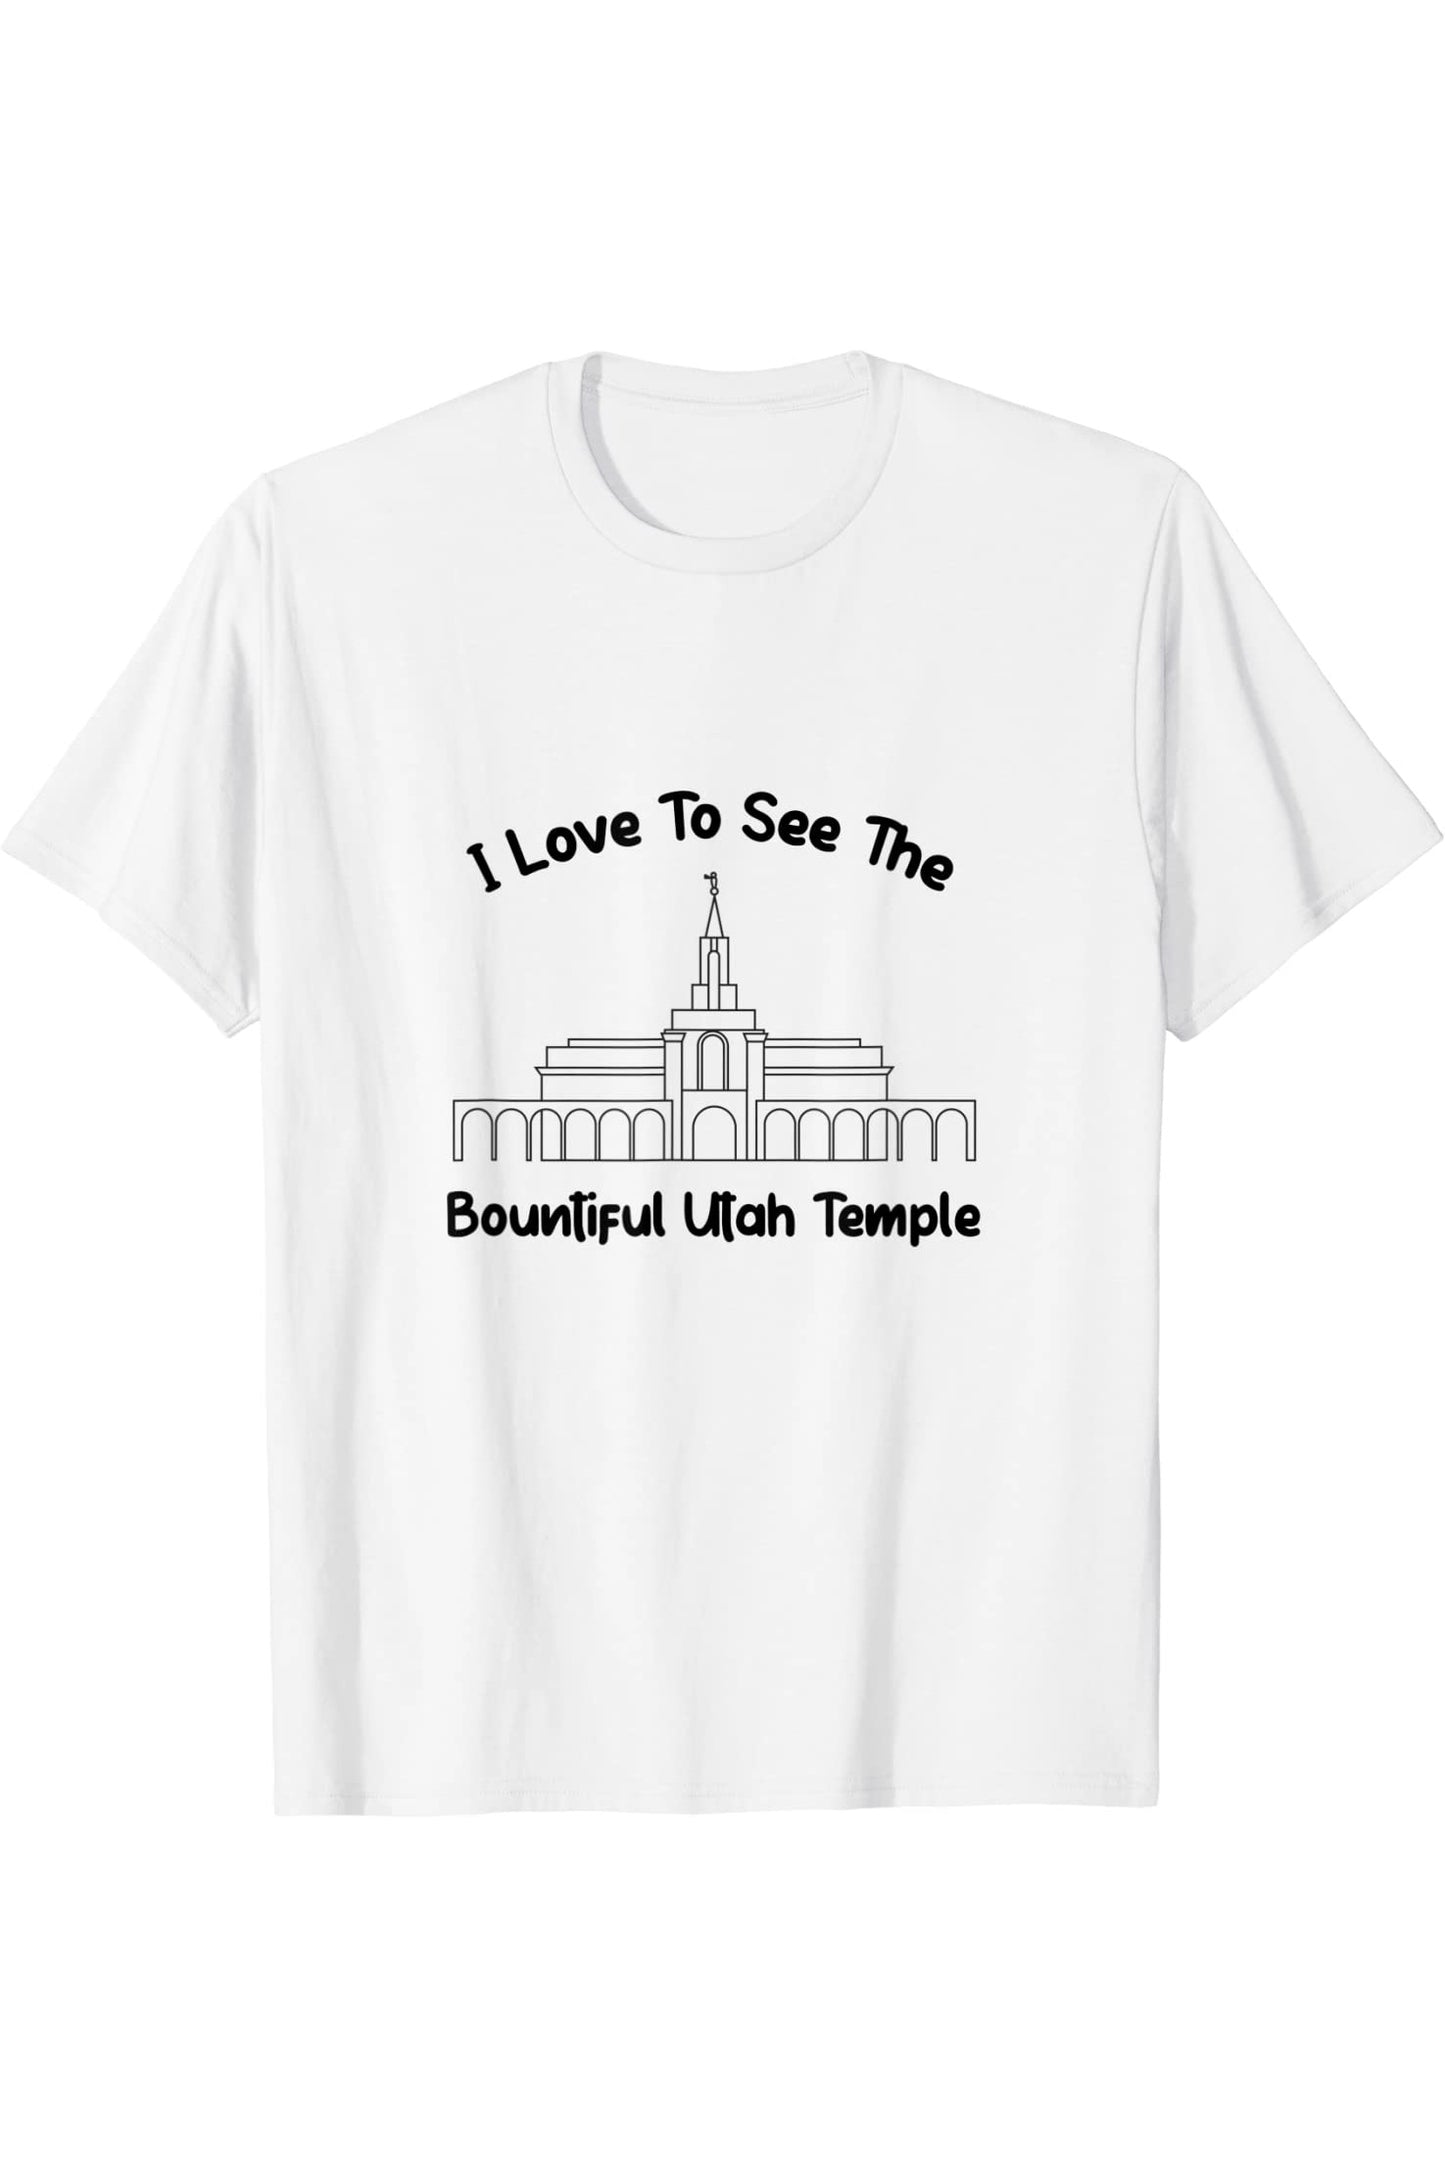 Bountiful Utah Temple, I love to see my temple, primary T-Shirt